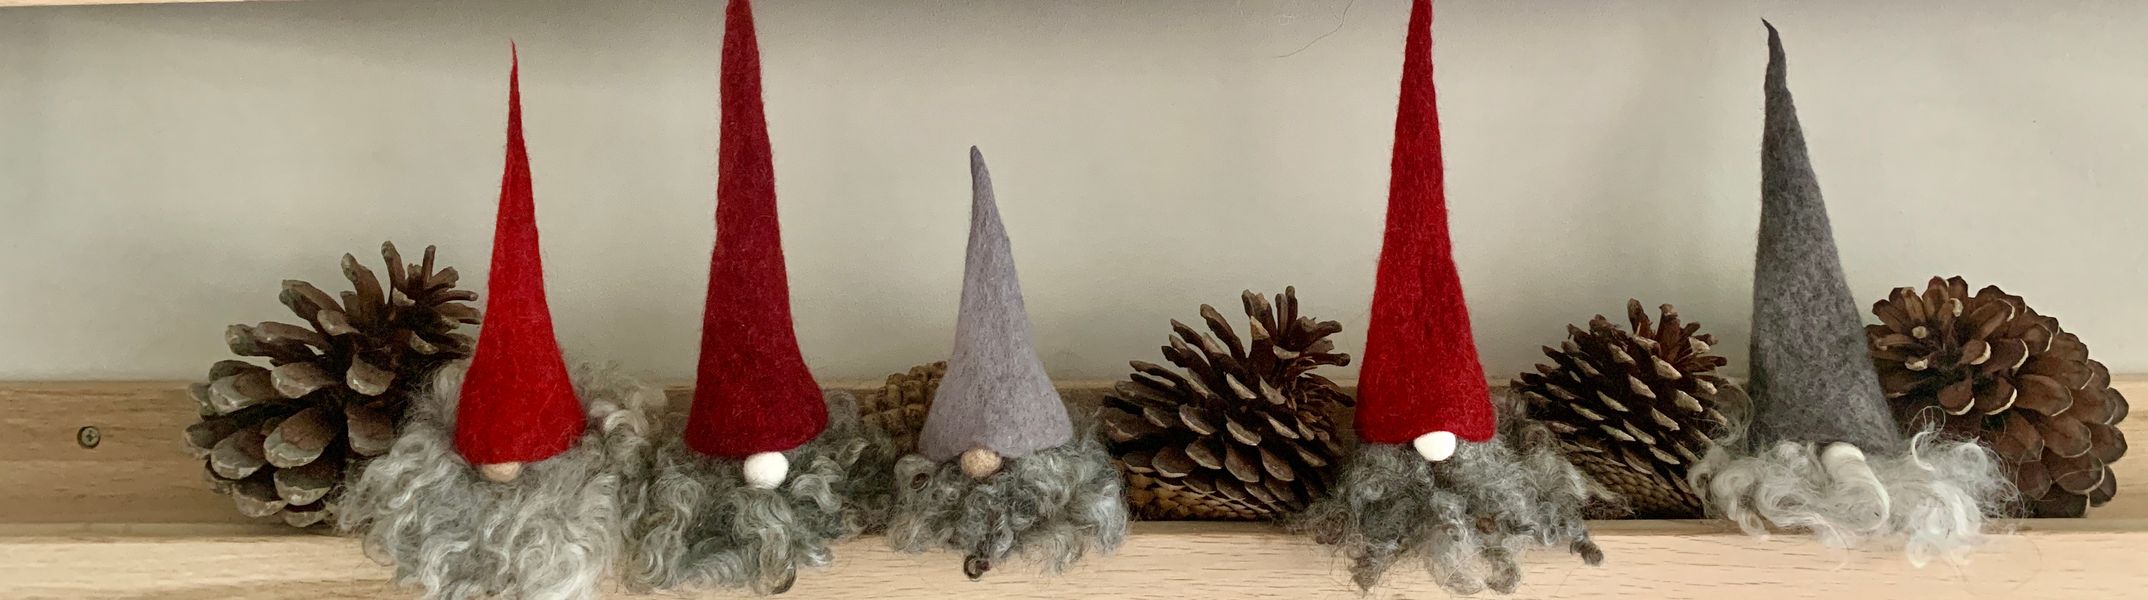 A selection of Scandi Tomte with shades of red and grey conical hats of varying heights.  They have long curly beards.  There are pine cones between them.